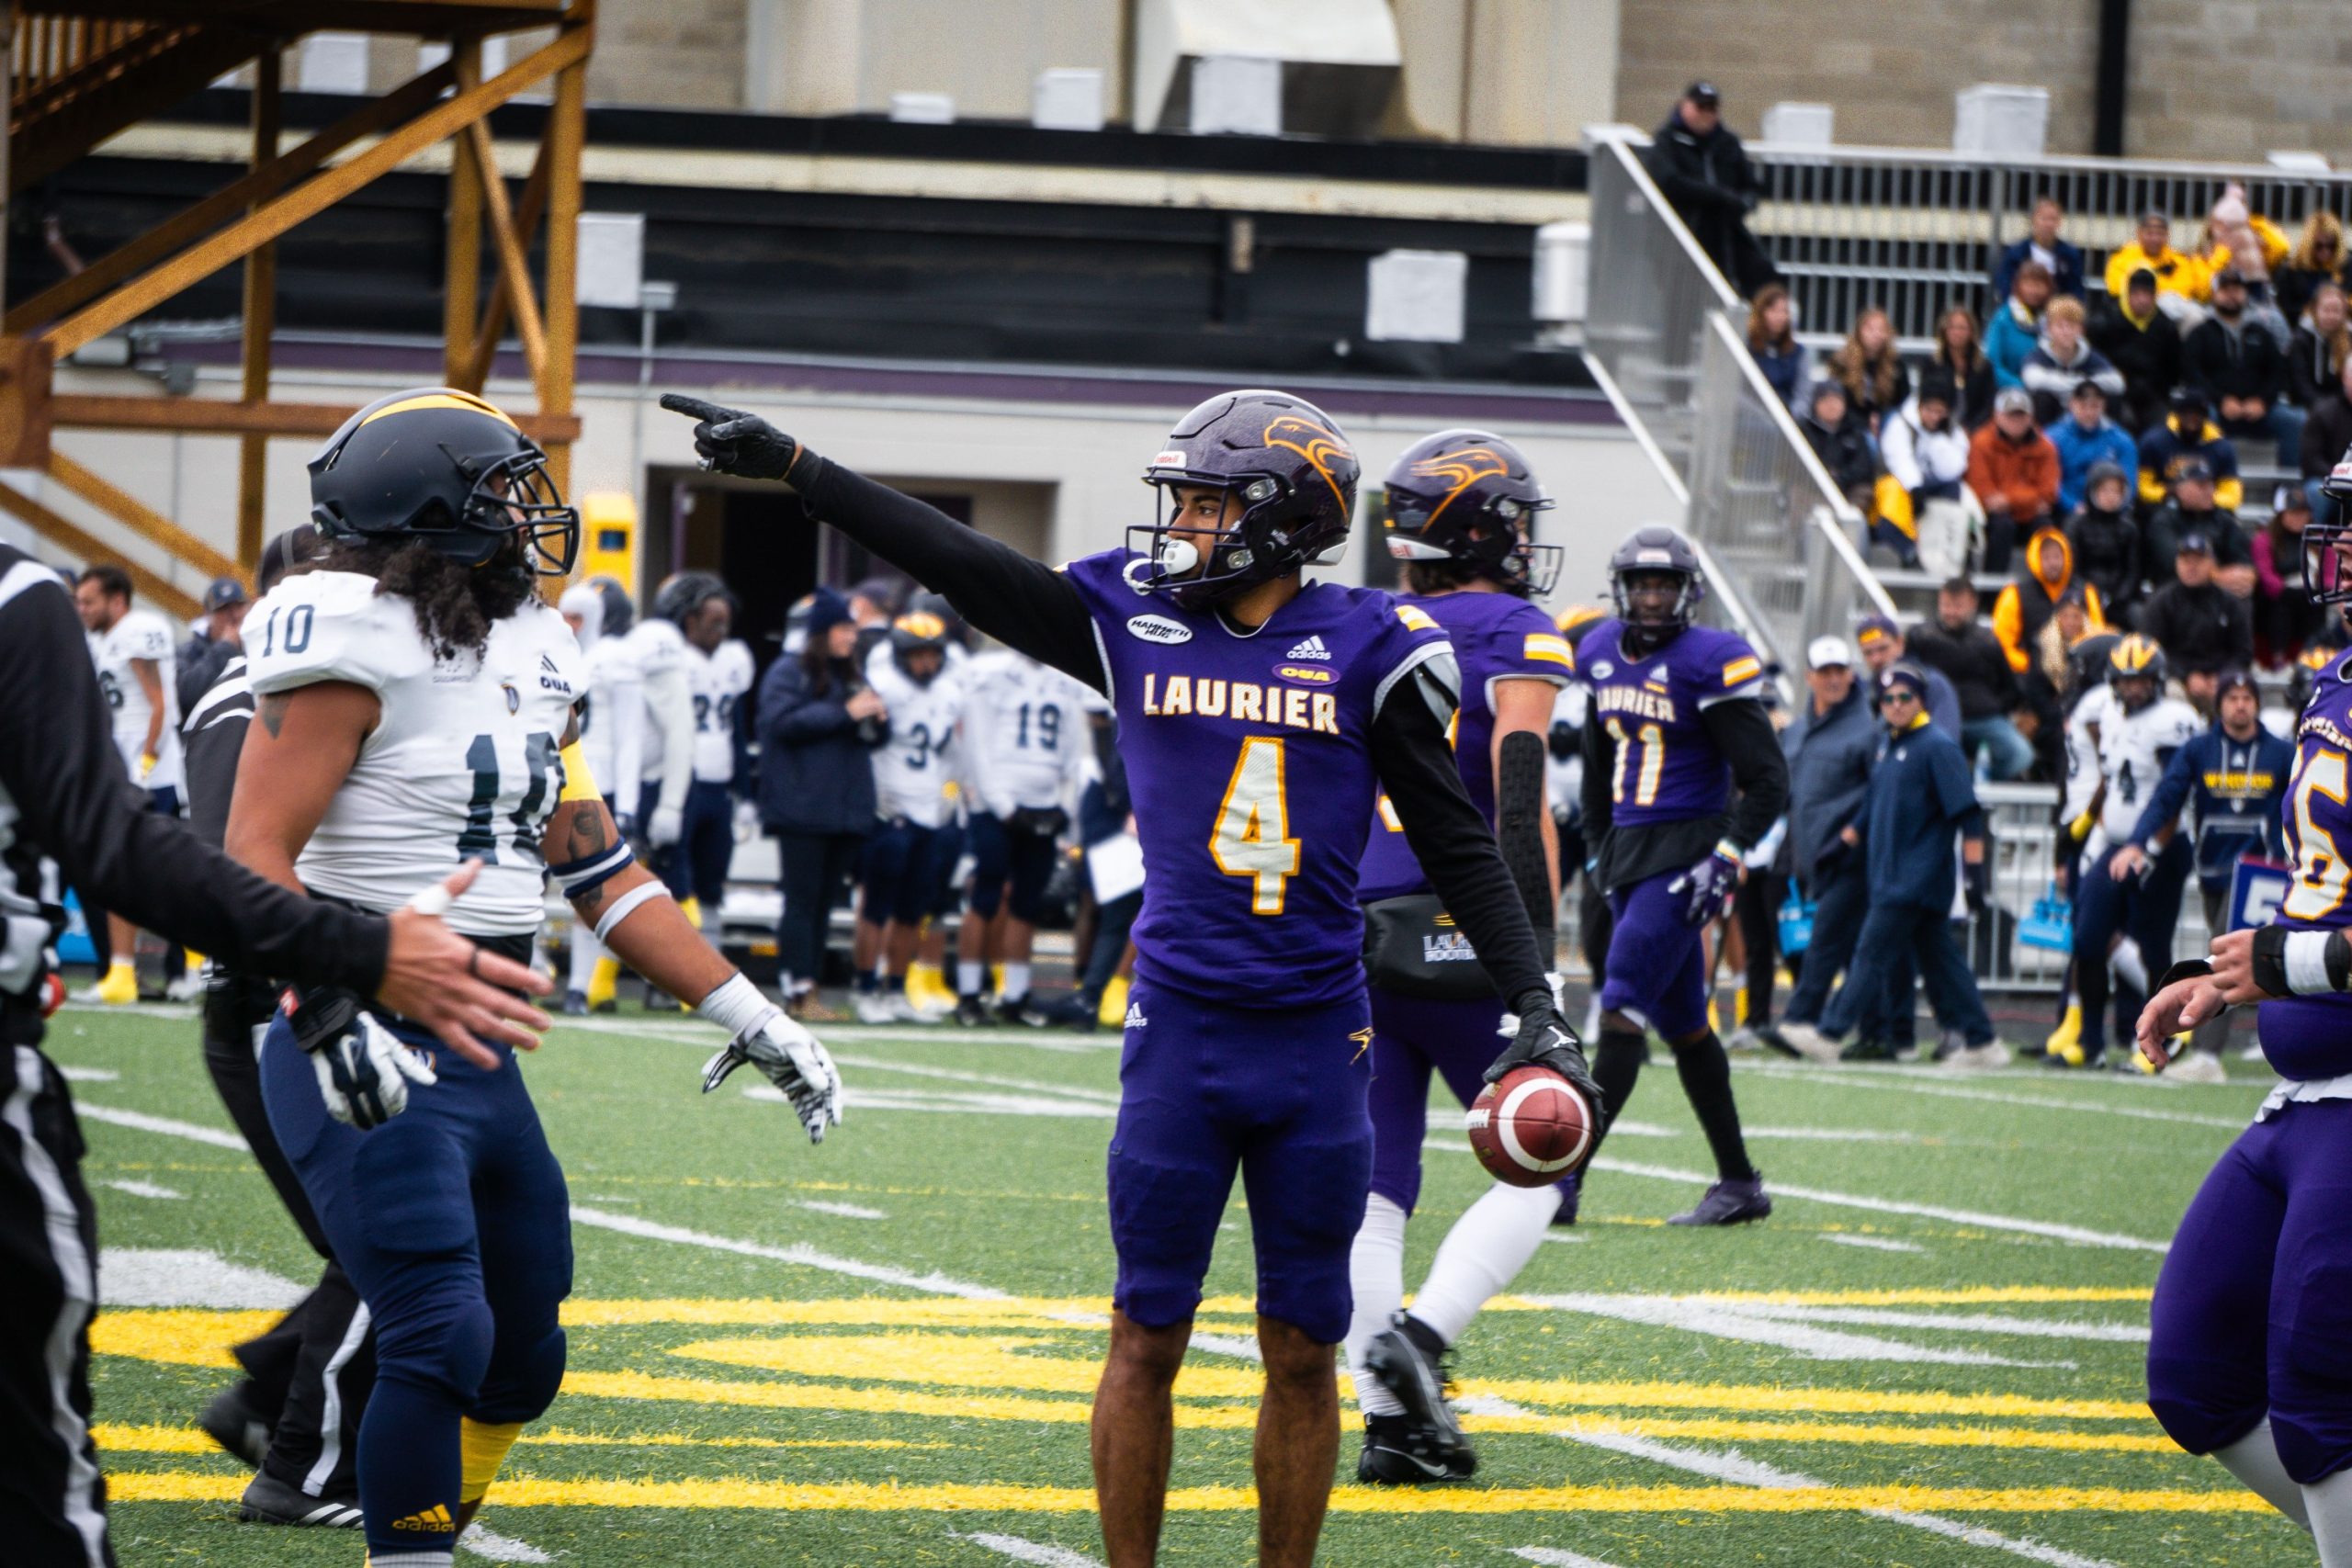 Laurier Men's football player about to make a play